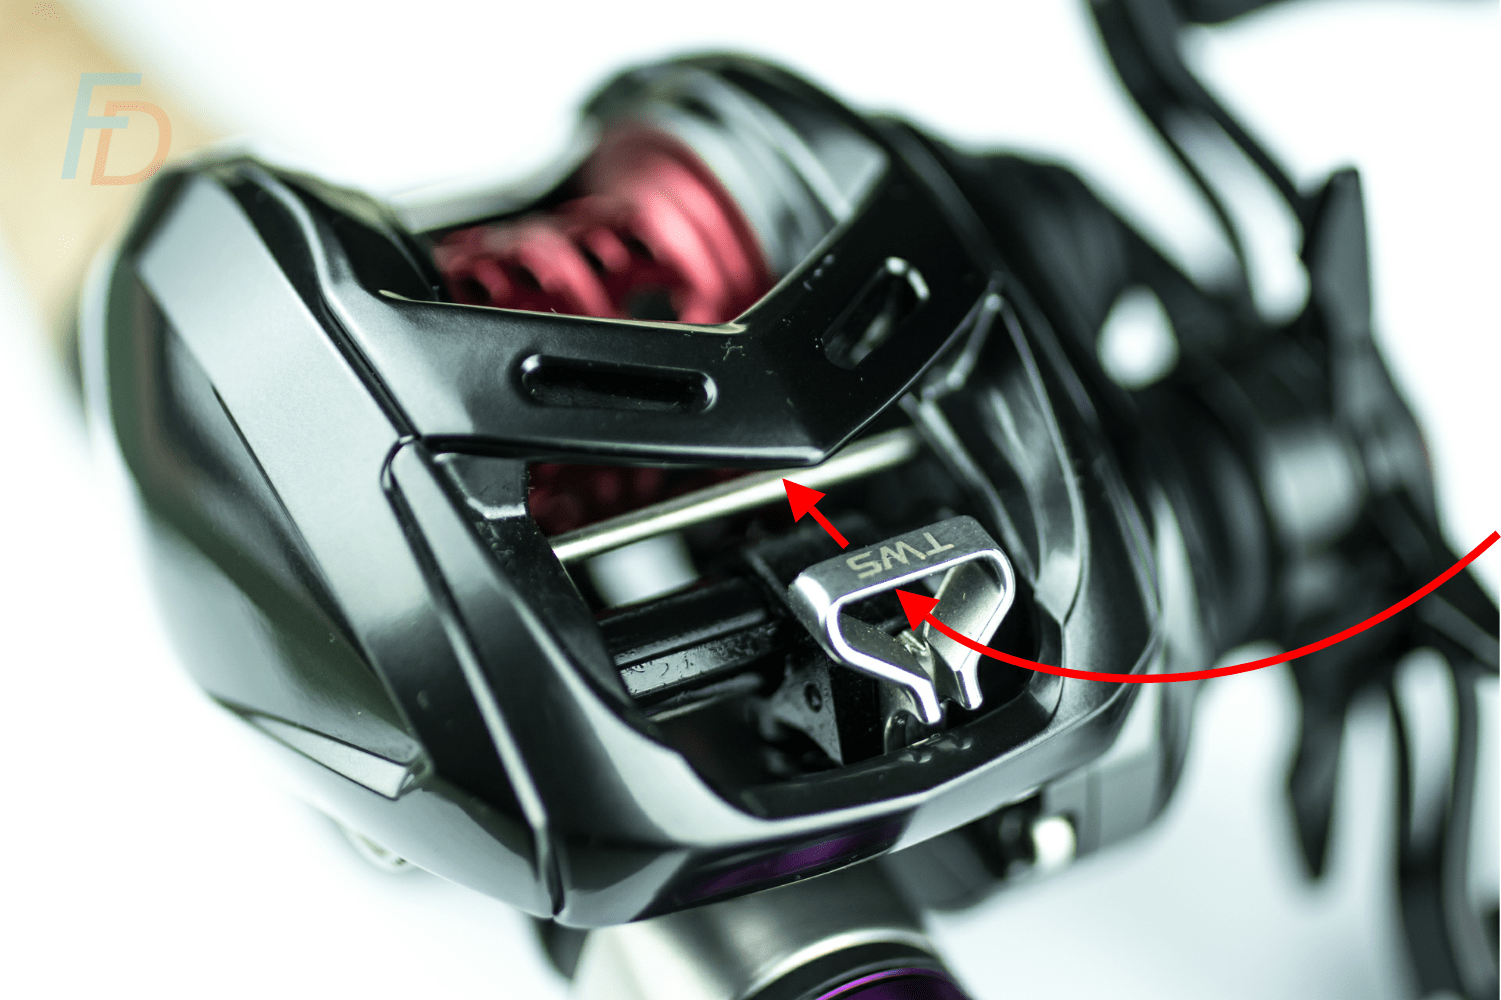 How to set up a baitcaster reel - Line threading direction for spooling up